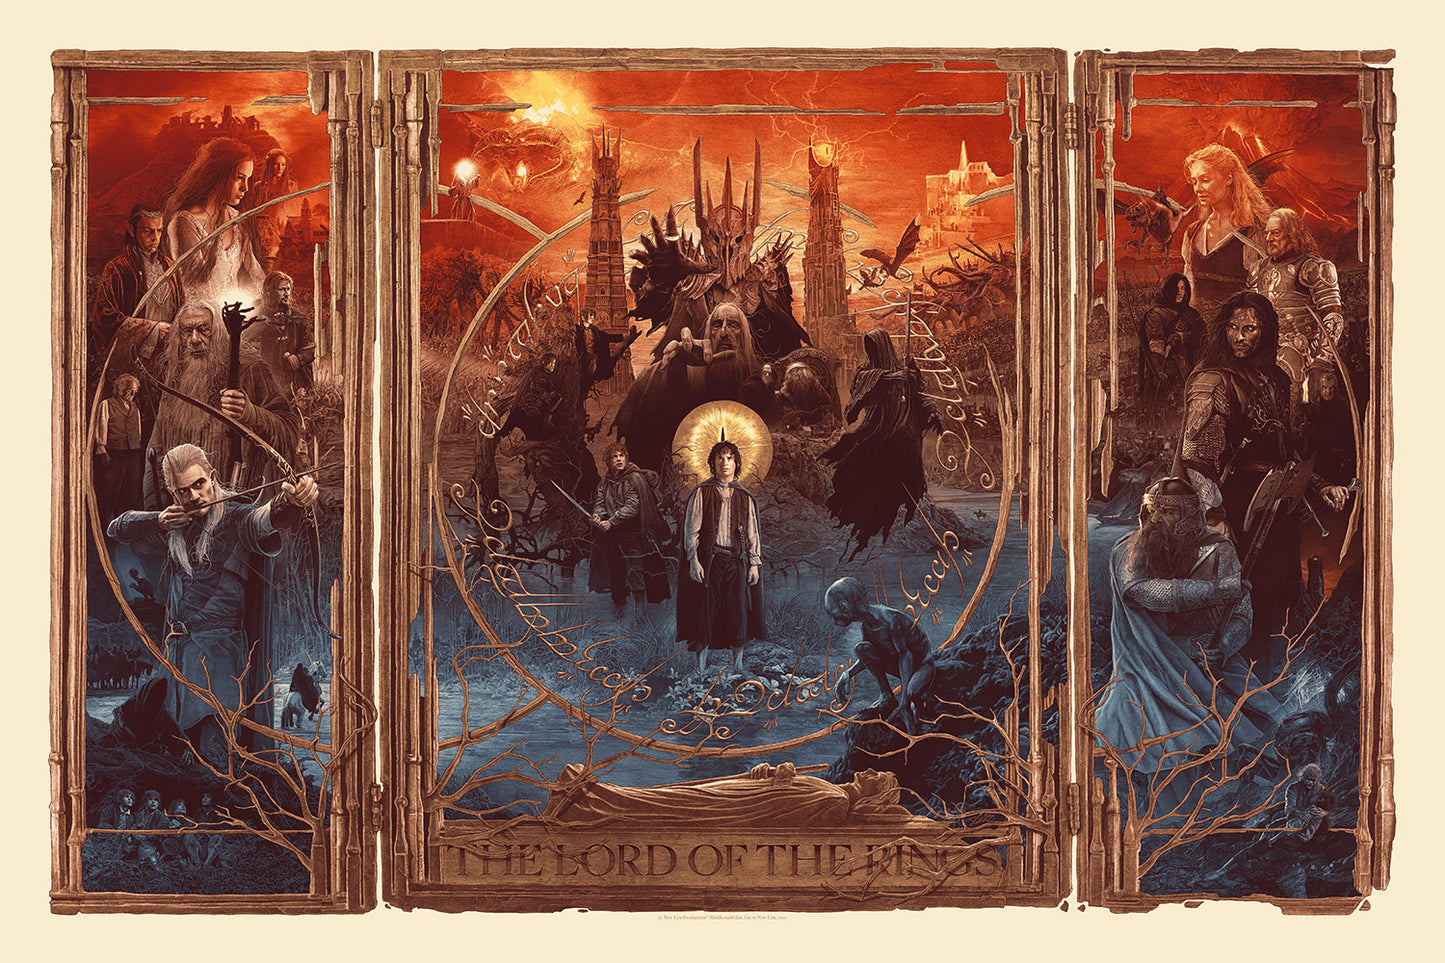 Gabz "The Lord of the Rings Triptych" Timed Edition (Wave 2)